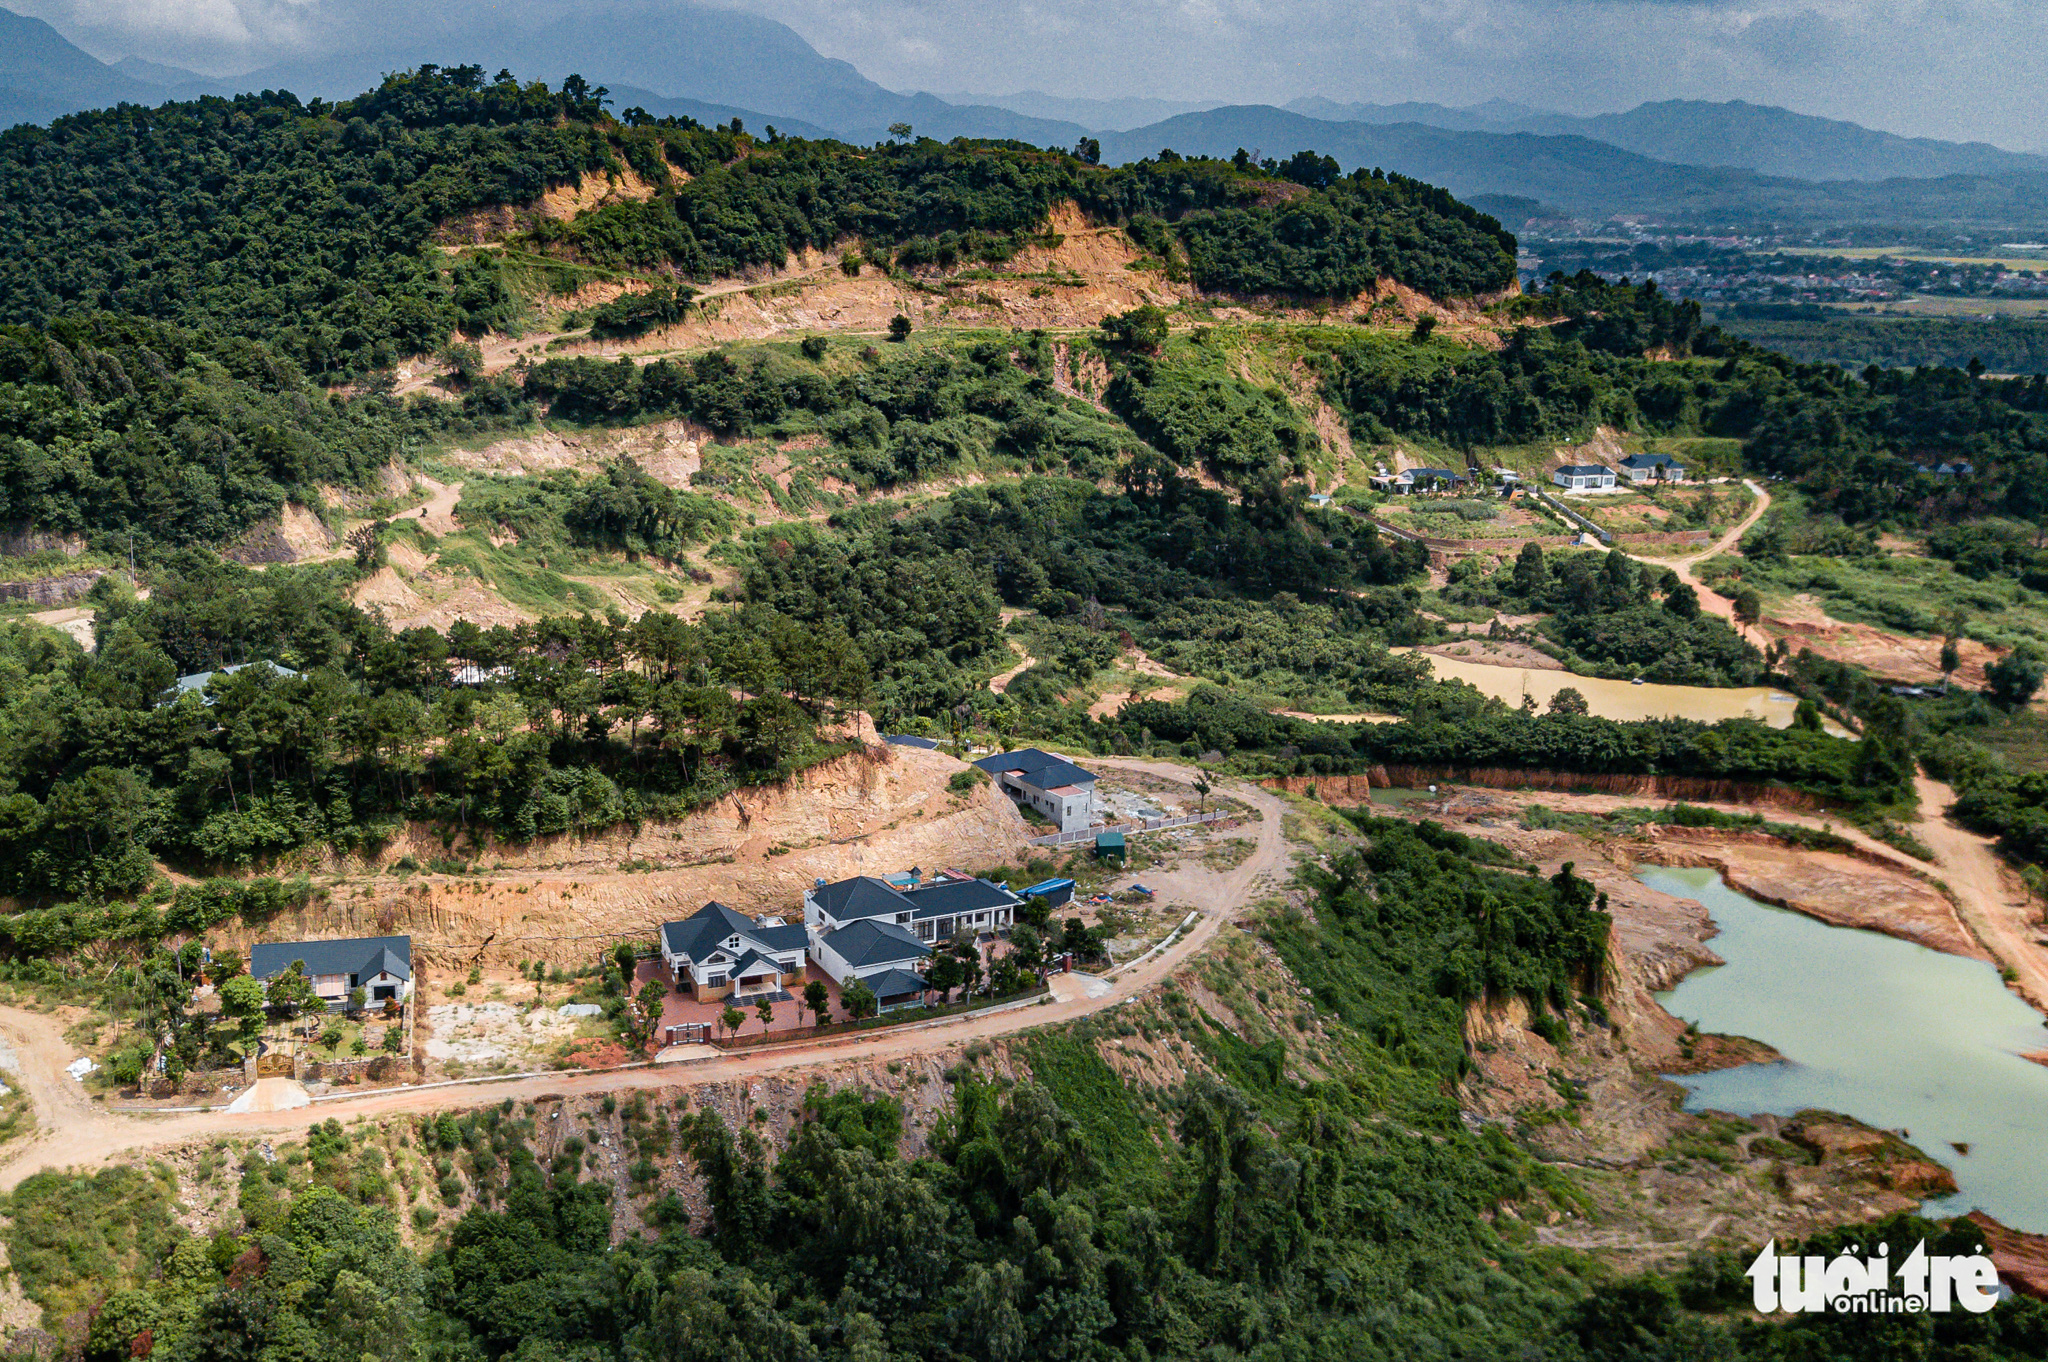 Photos: Northern Vietnamese mountain destroyed for construction of villas, mansions